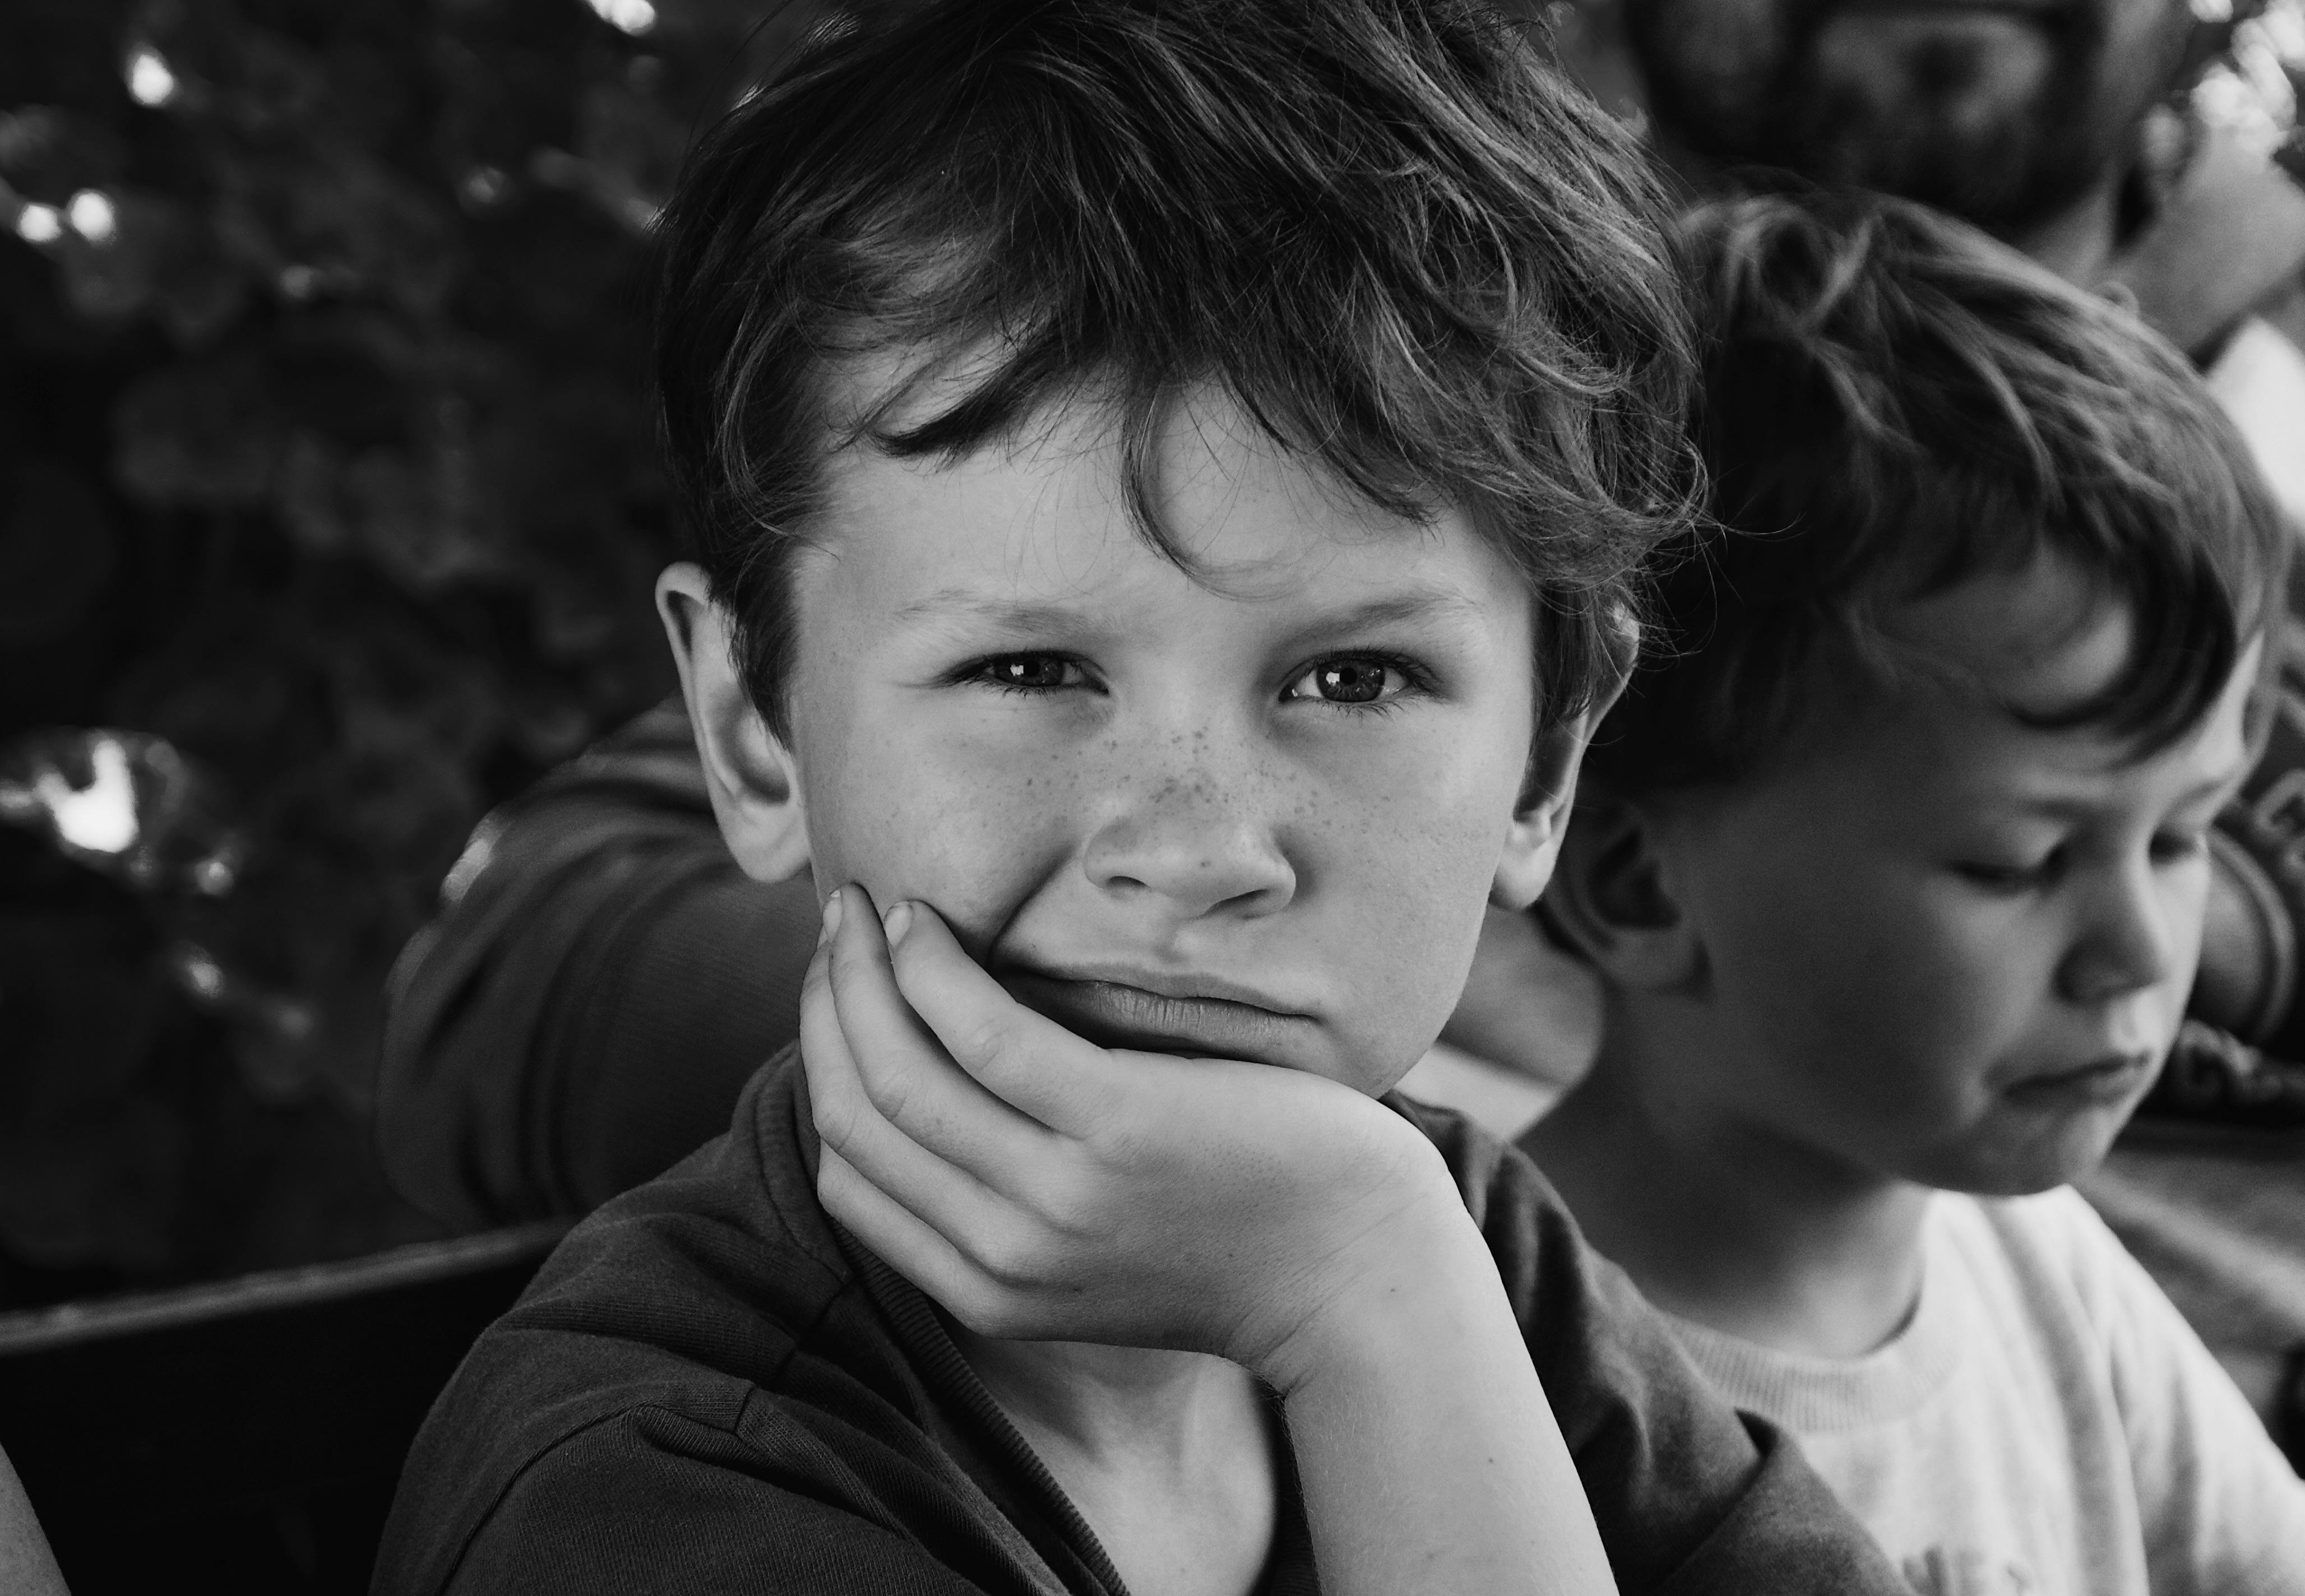 Two children sitting next to each other | Source: Pexels